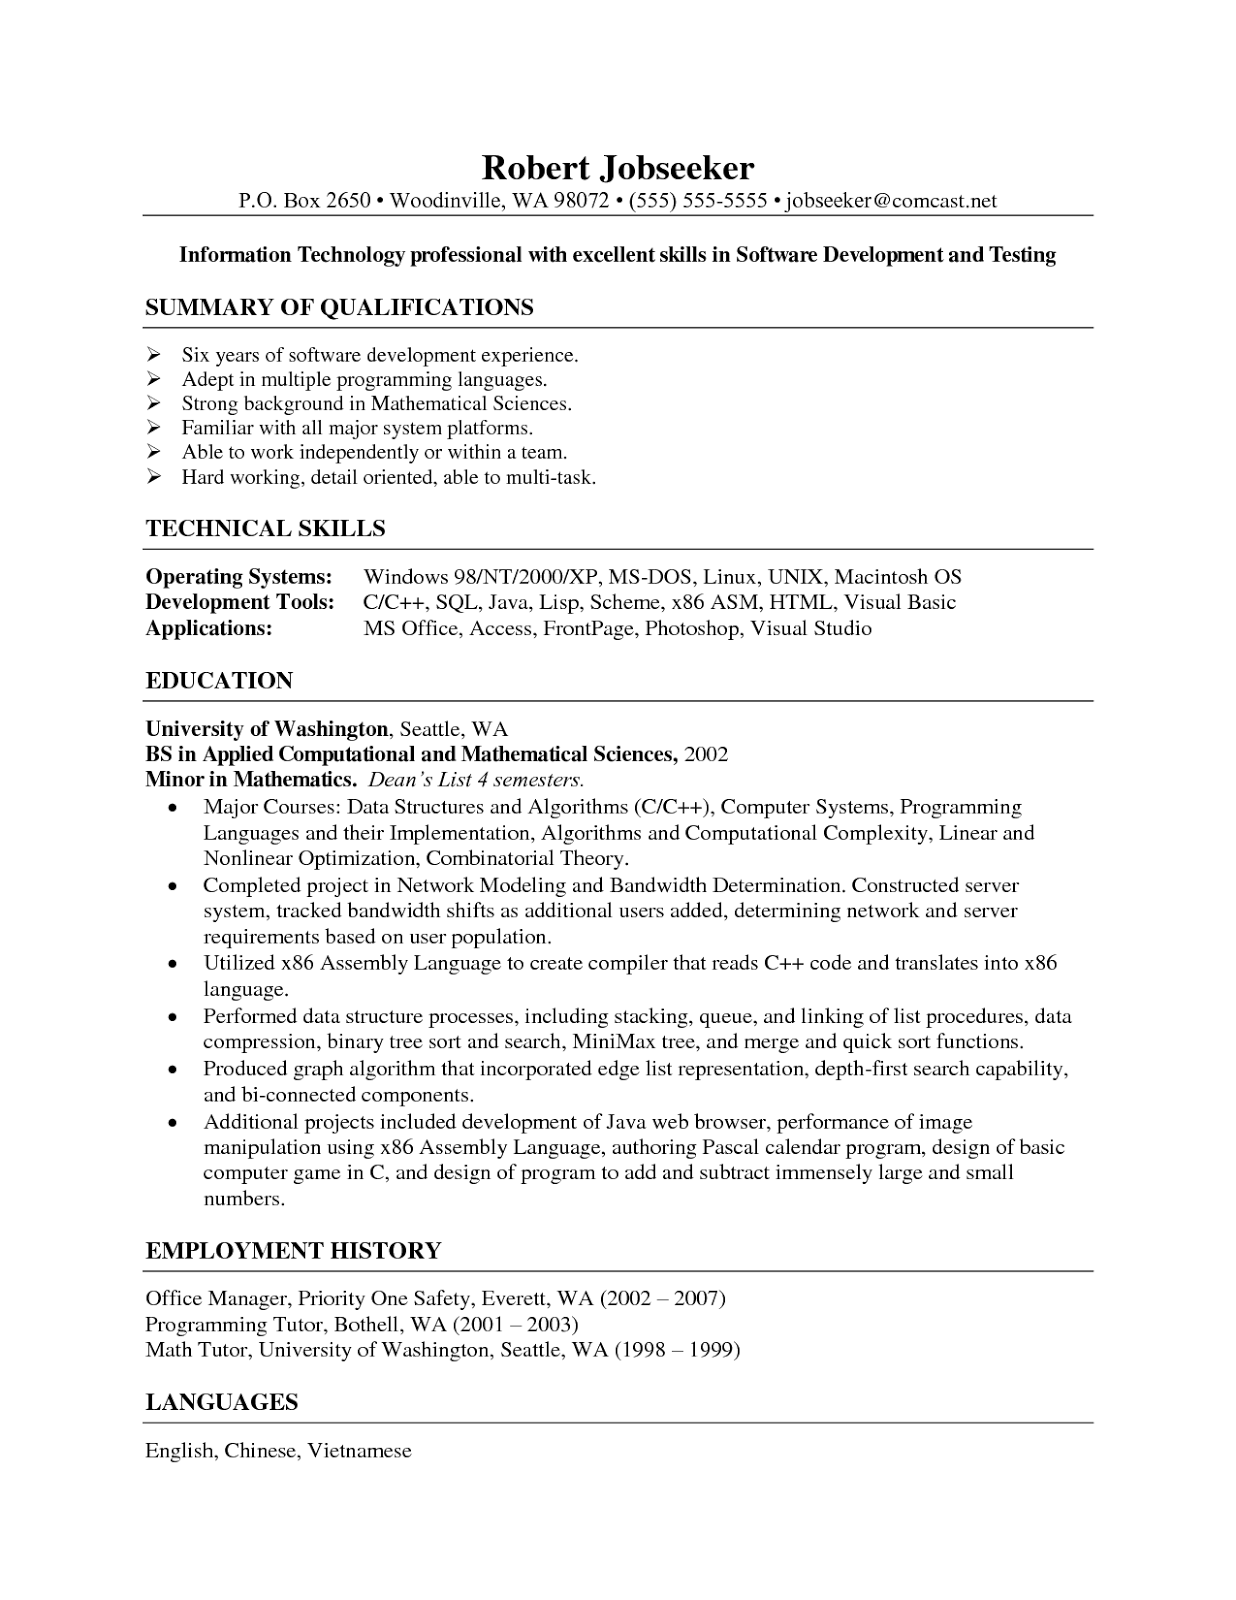 Resumes and cover letters